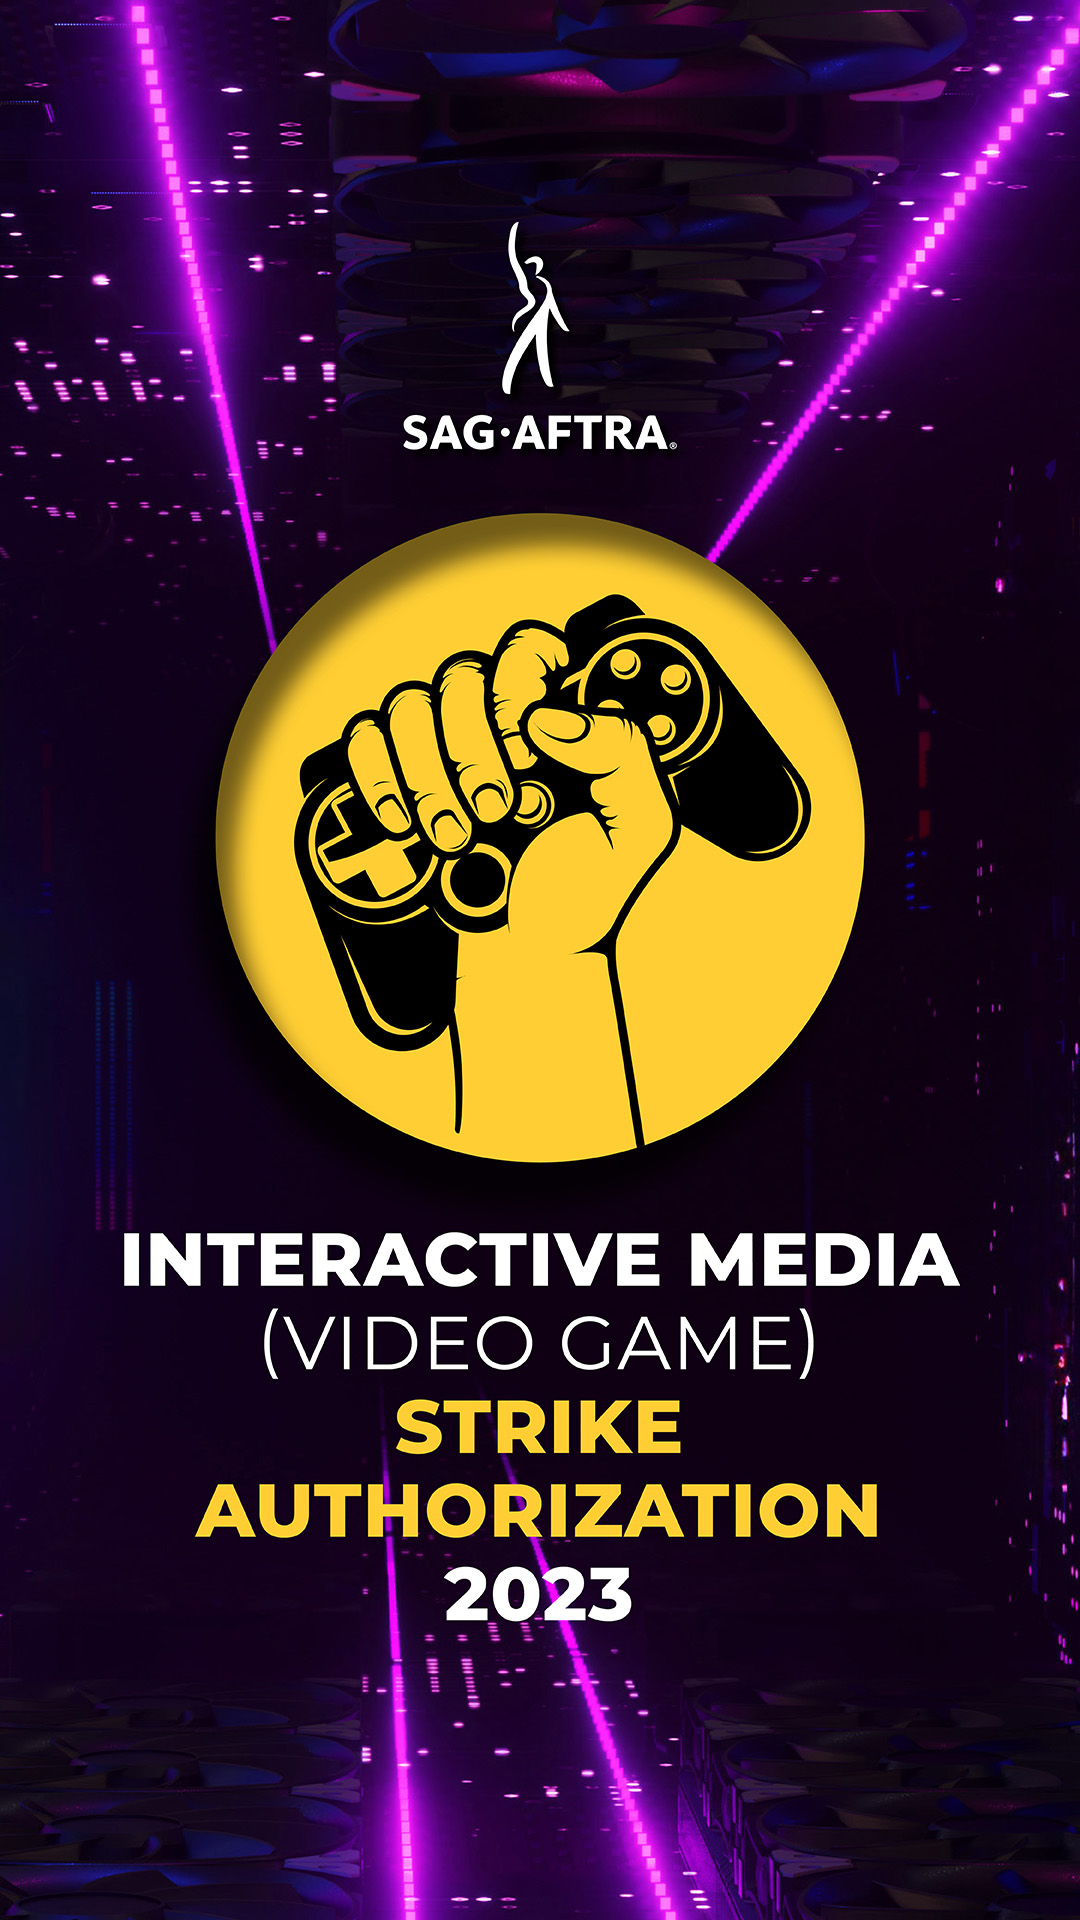 Games and Interactive Media